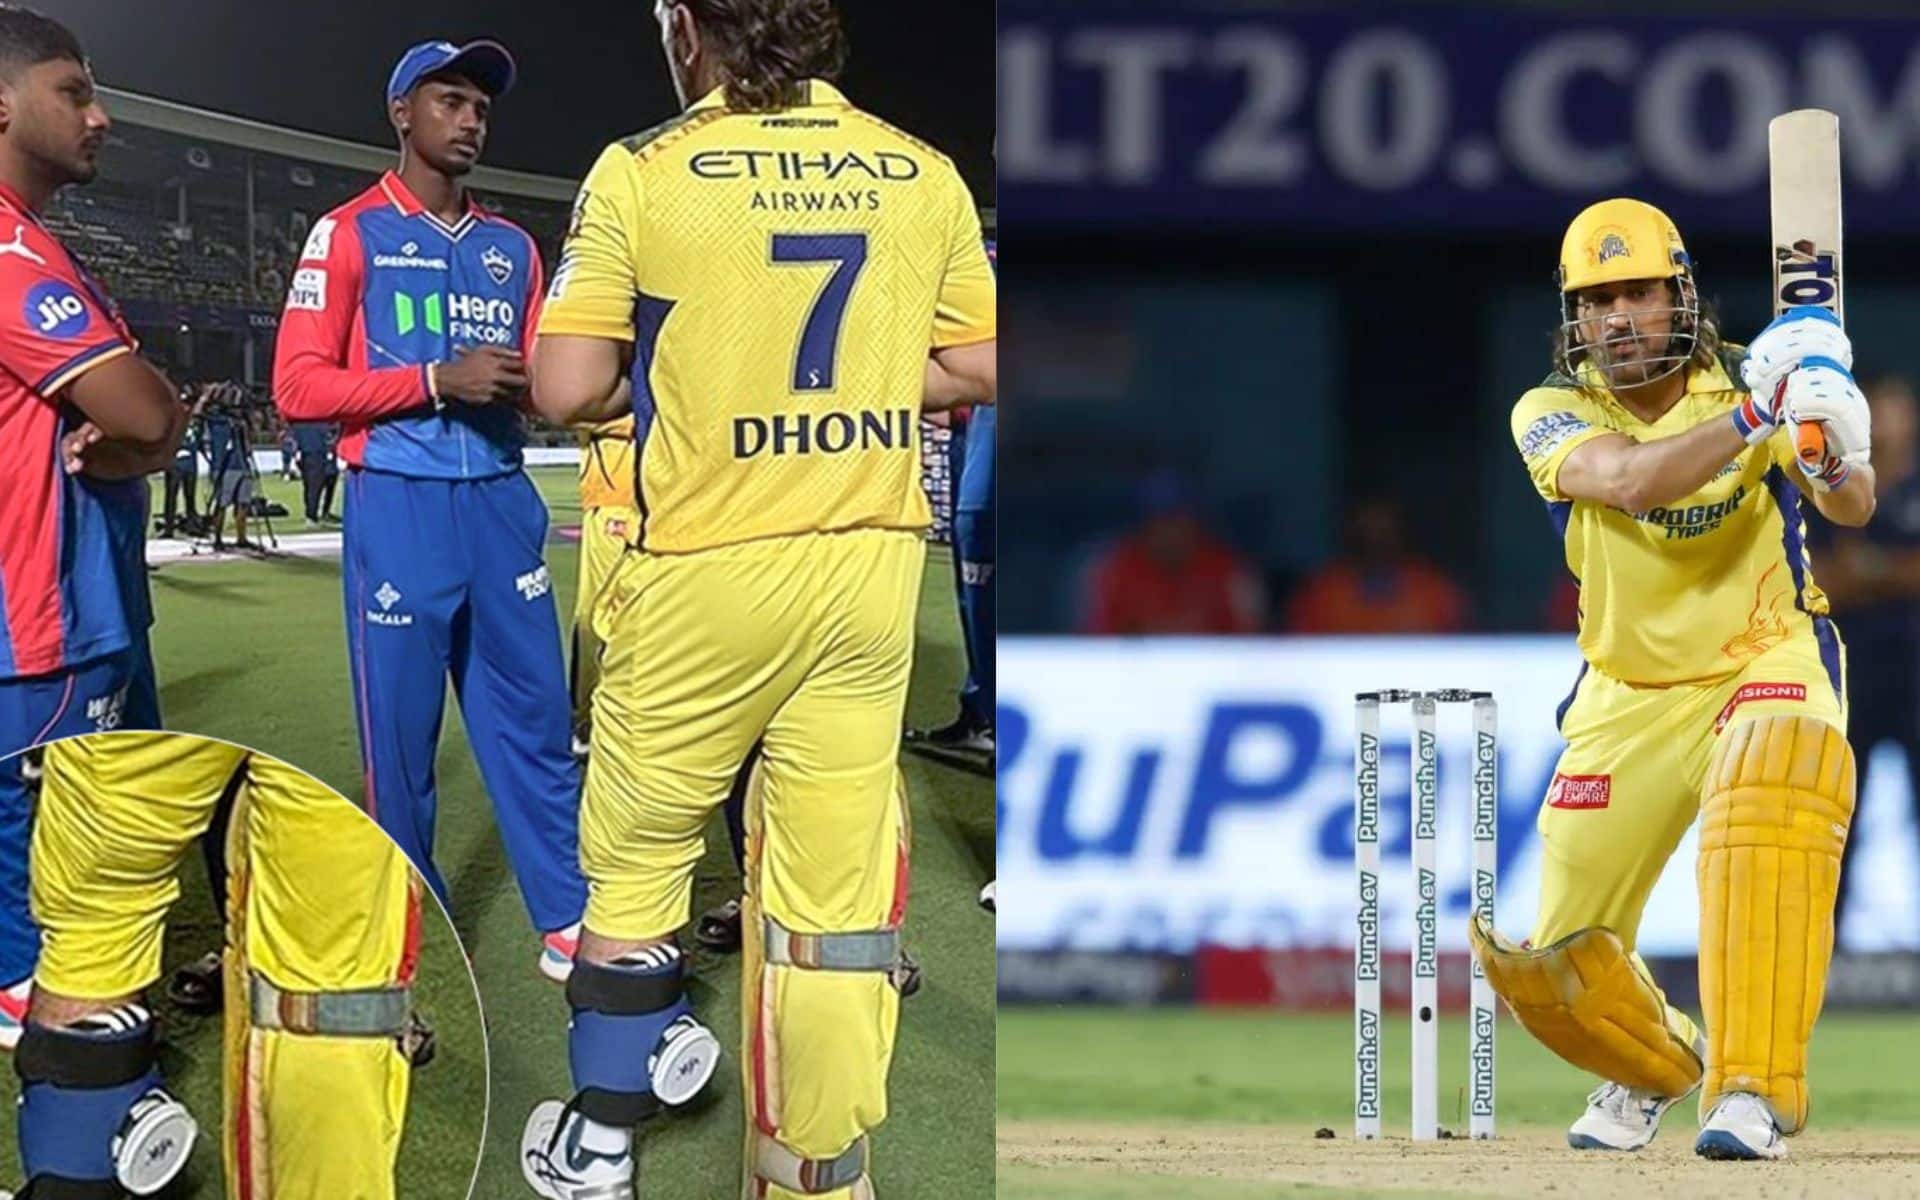 Injury Concern For CSK? MS Dhoni Walks With Ice Pack On His Leg After IPL Match Vs DC